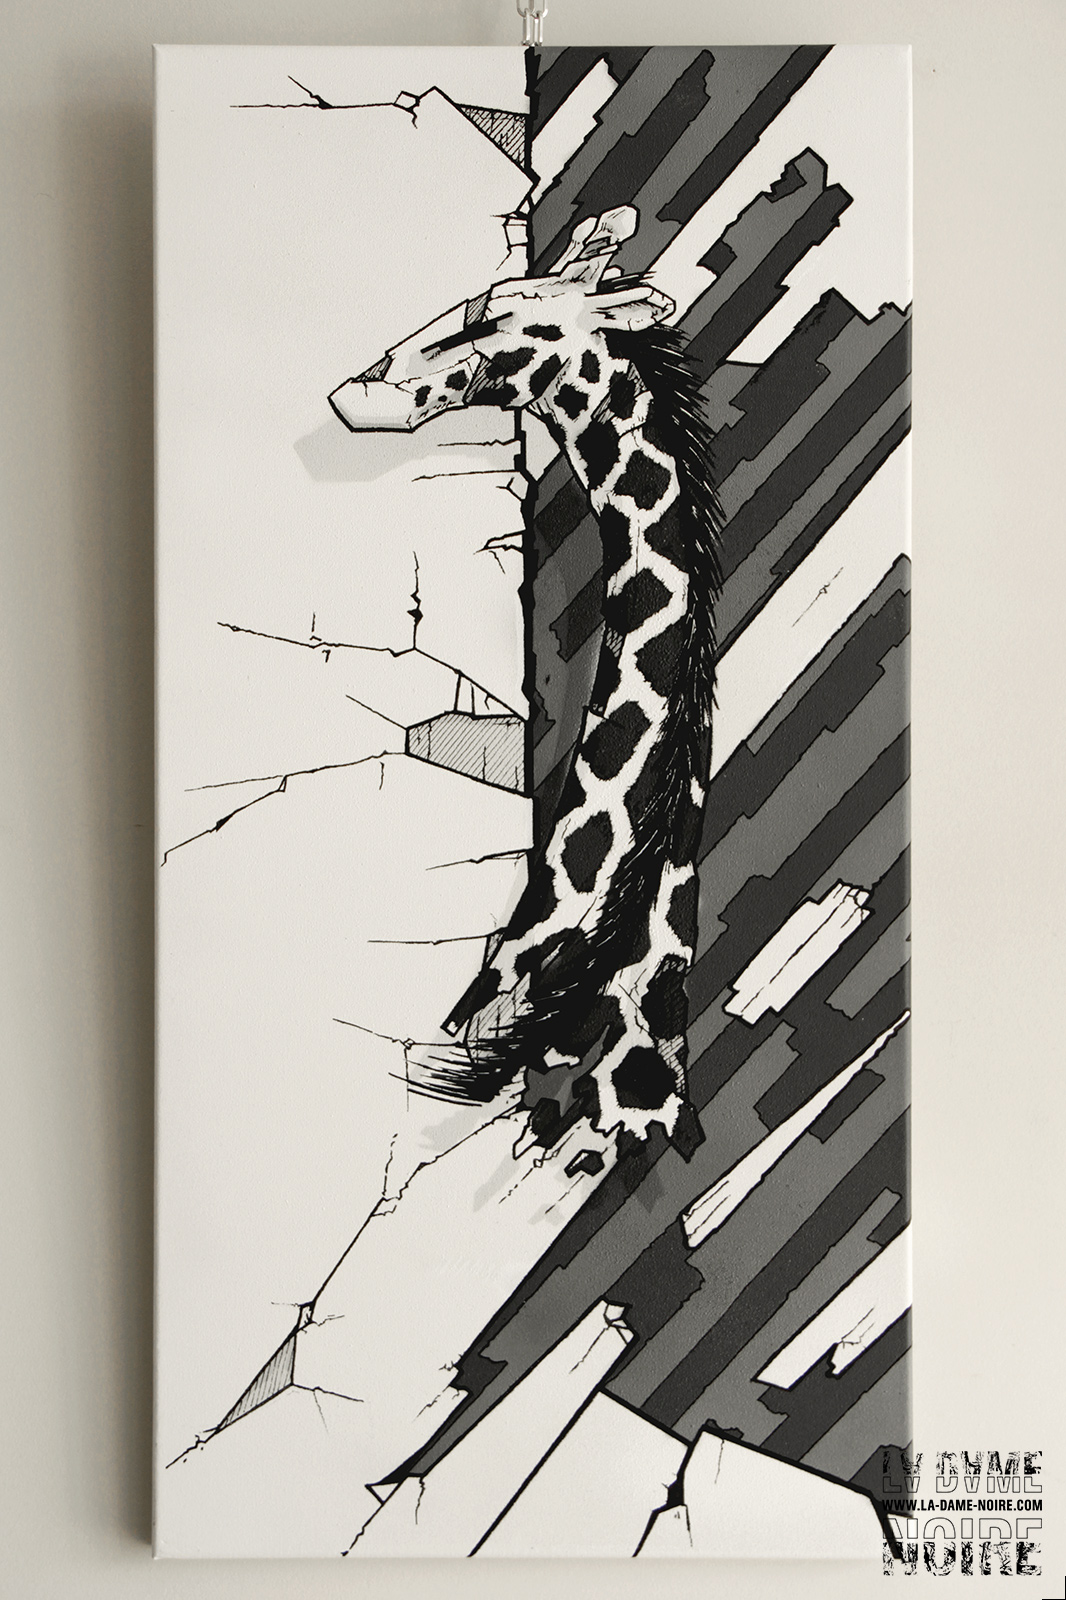 Painting of a giraffe in shades of grey